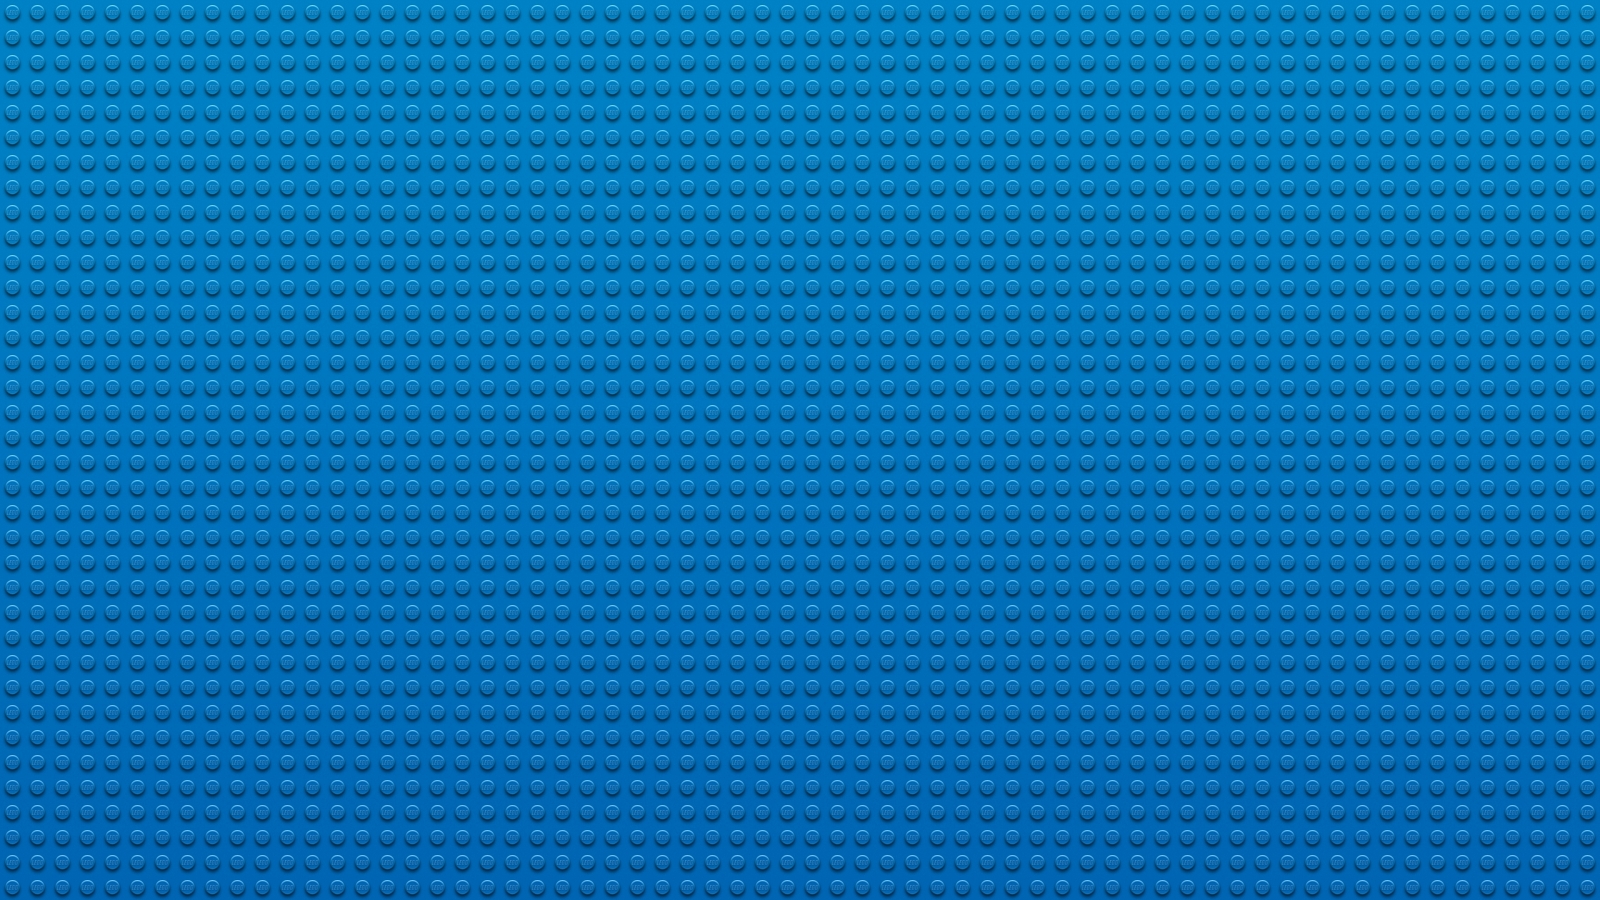 Lego Texture for 1600 x 900 HDTV resolution